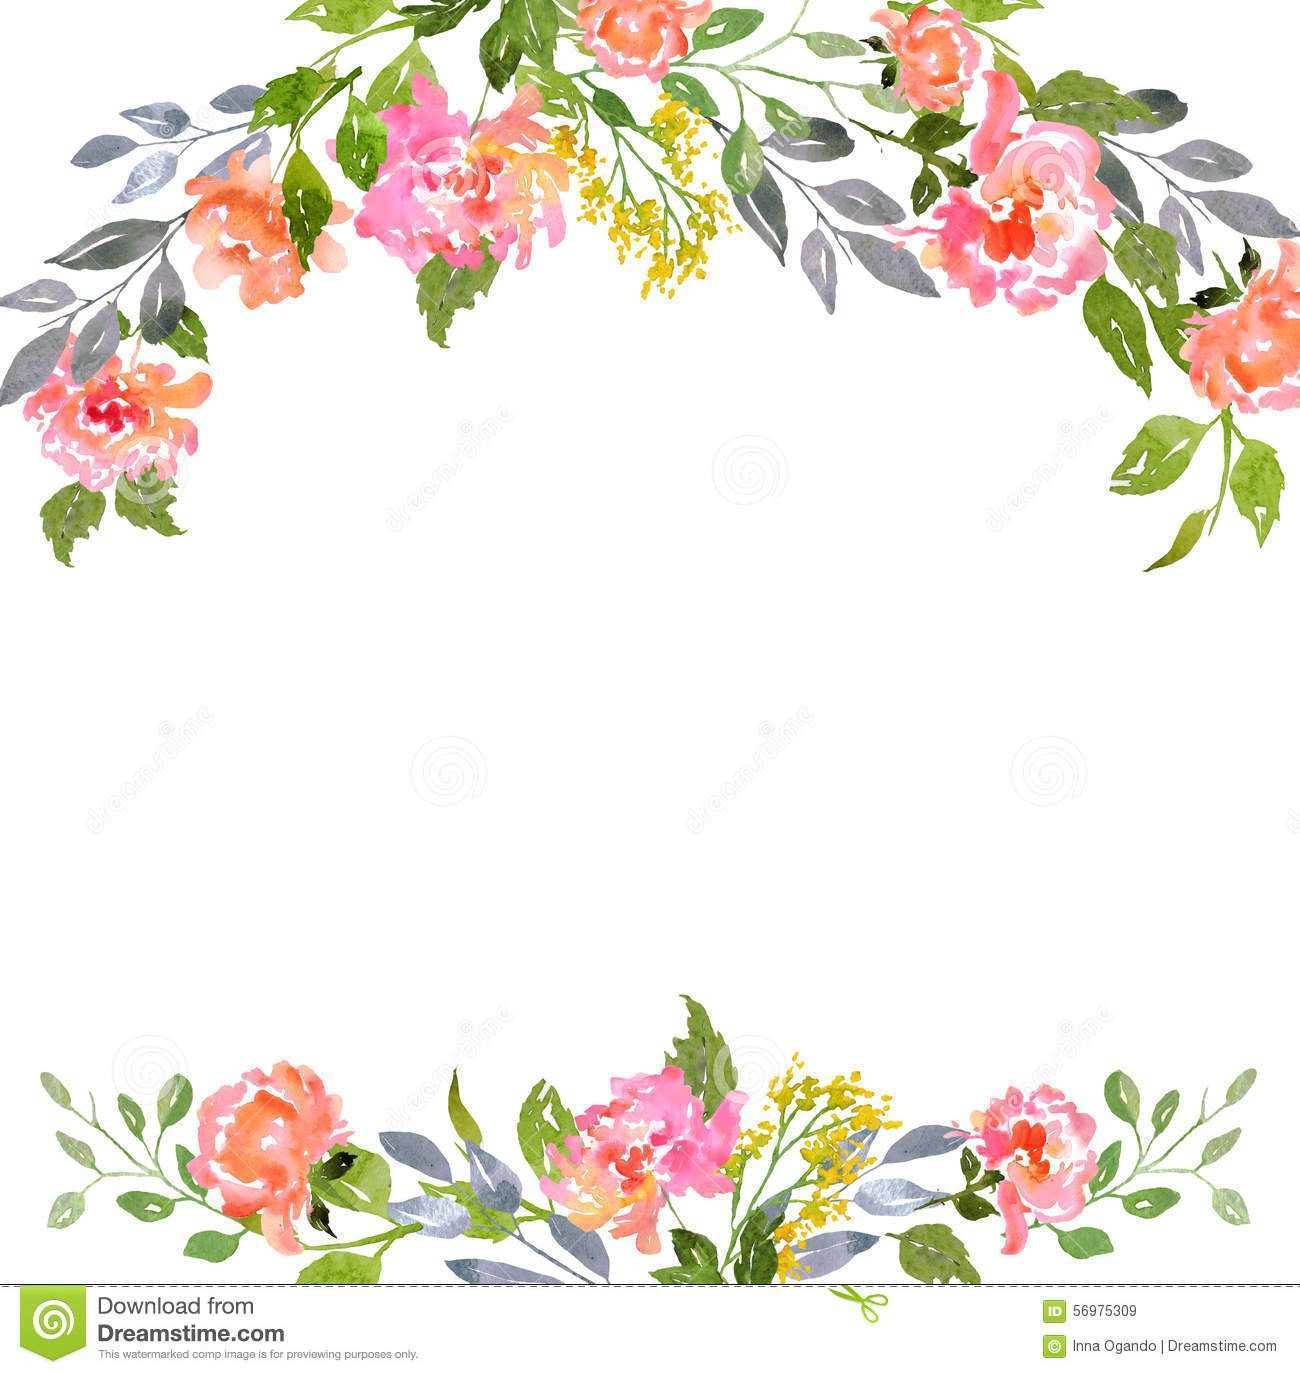 31 Printable Flower Card Design Template With Stunning Design with Flower Card Design Template